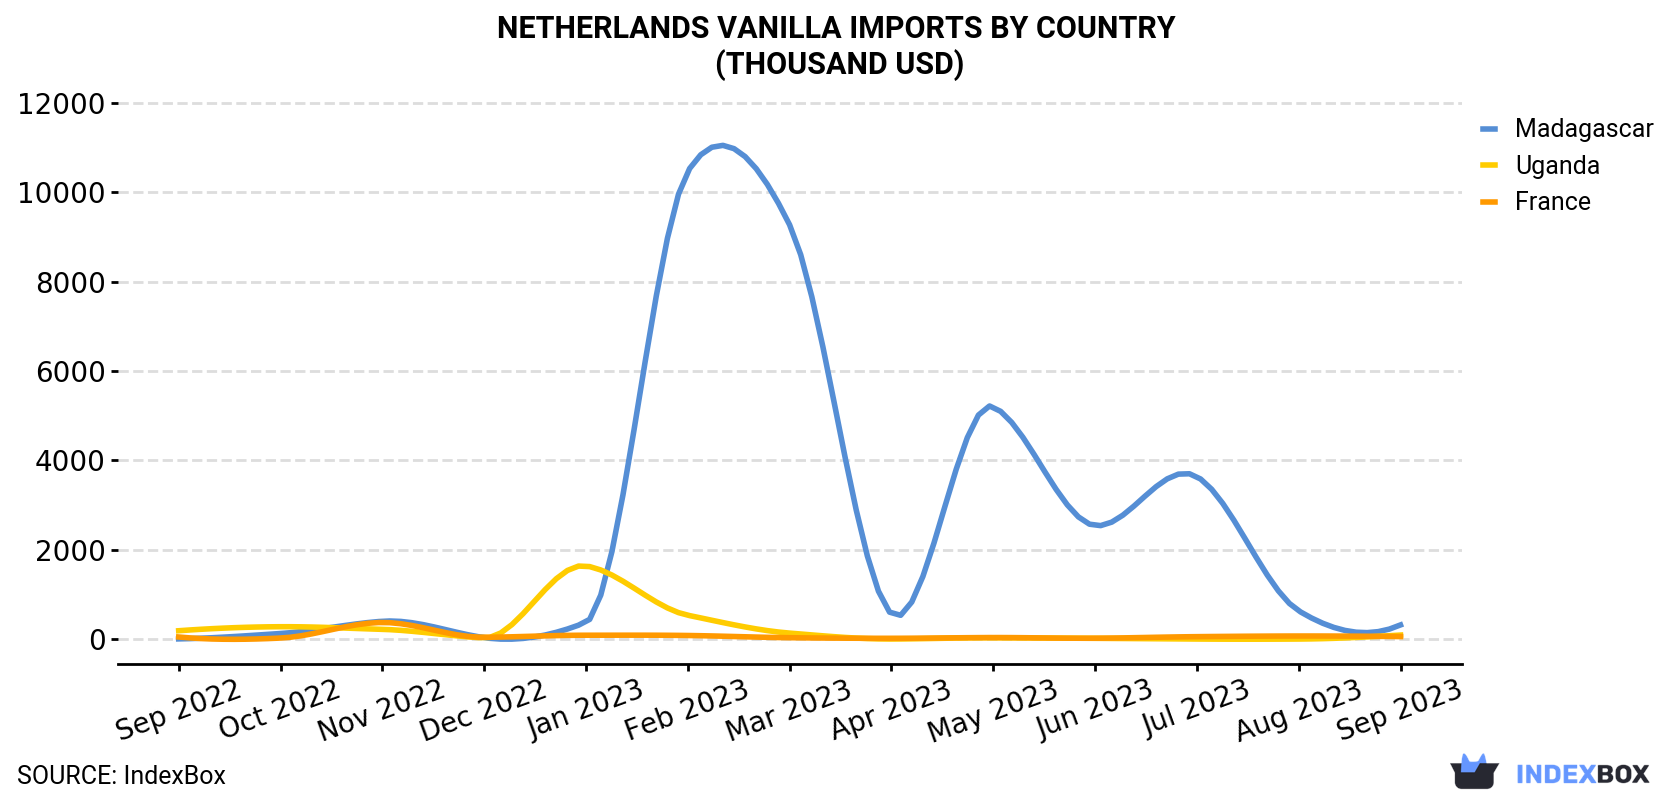 Netherlands Vanilla Imports By Country (Thousand USD)